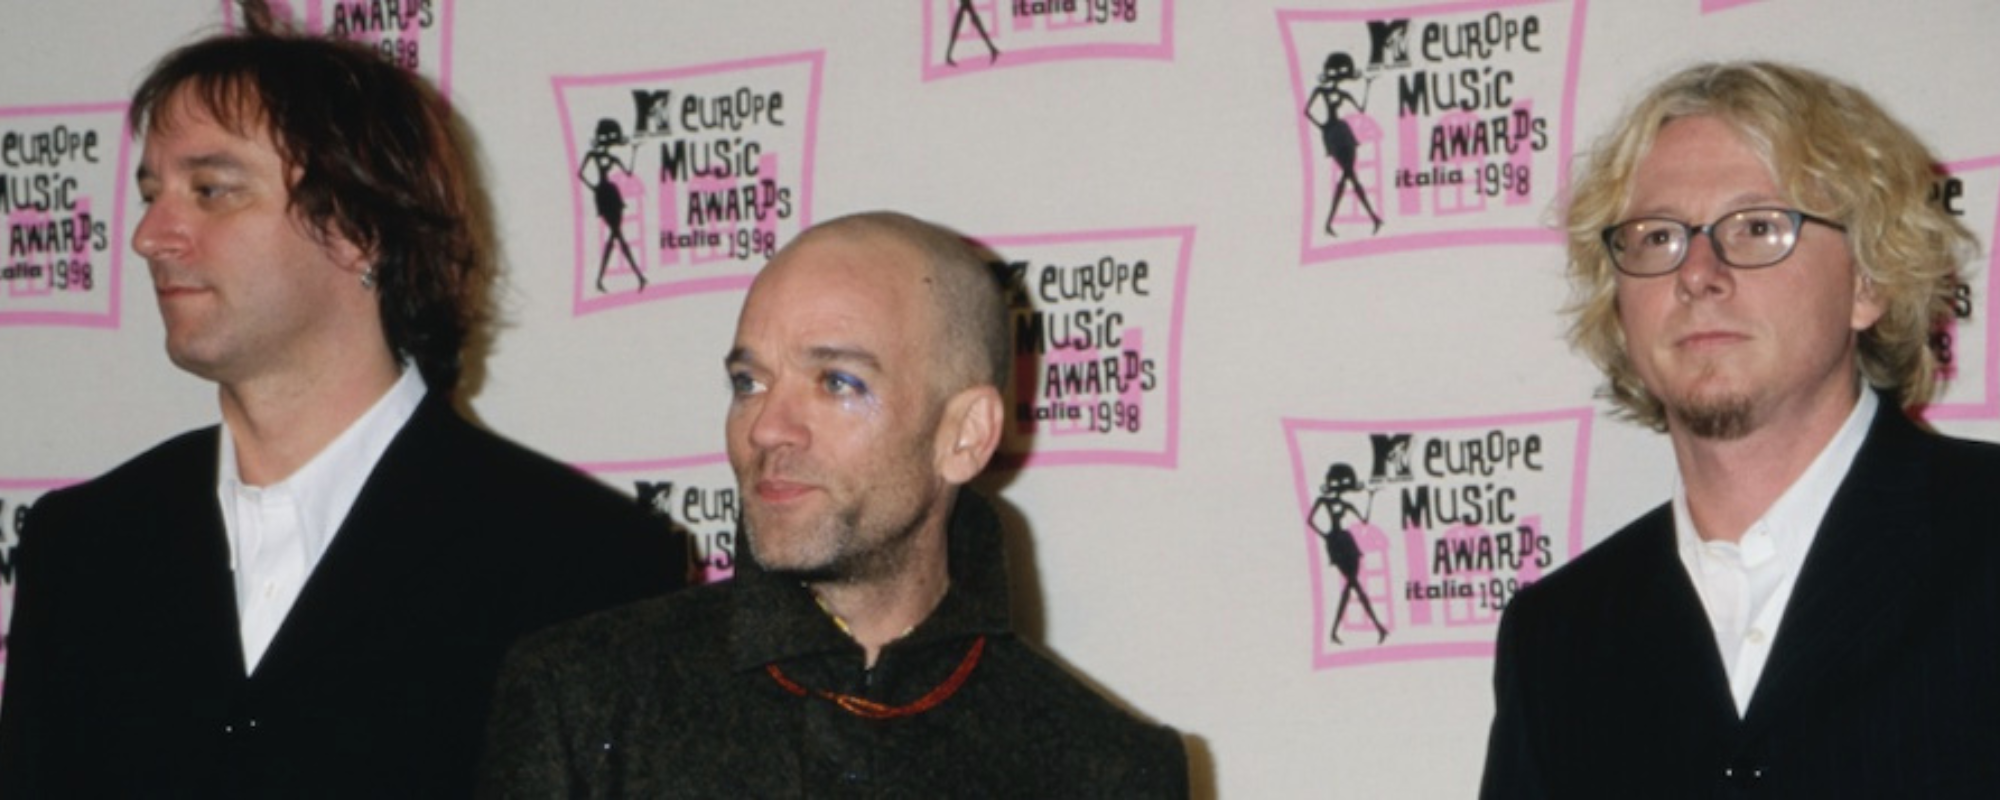 R.E.M.’s Mike Mills Says There’s No Chance for a Reunion; Reveals Solo Album Plans